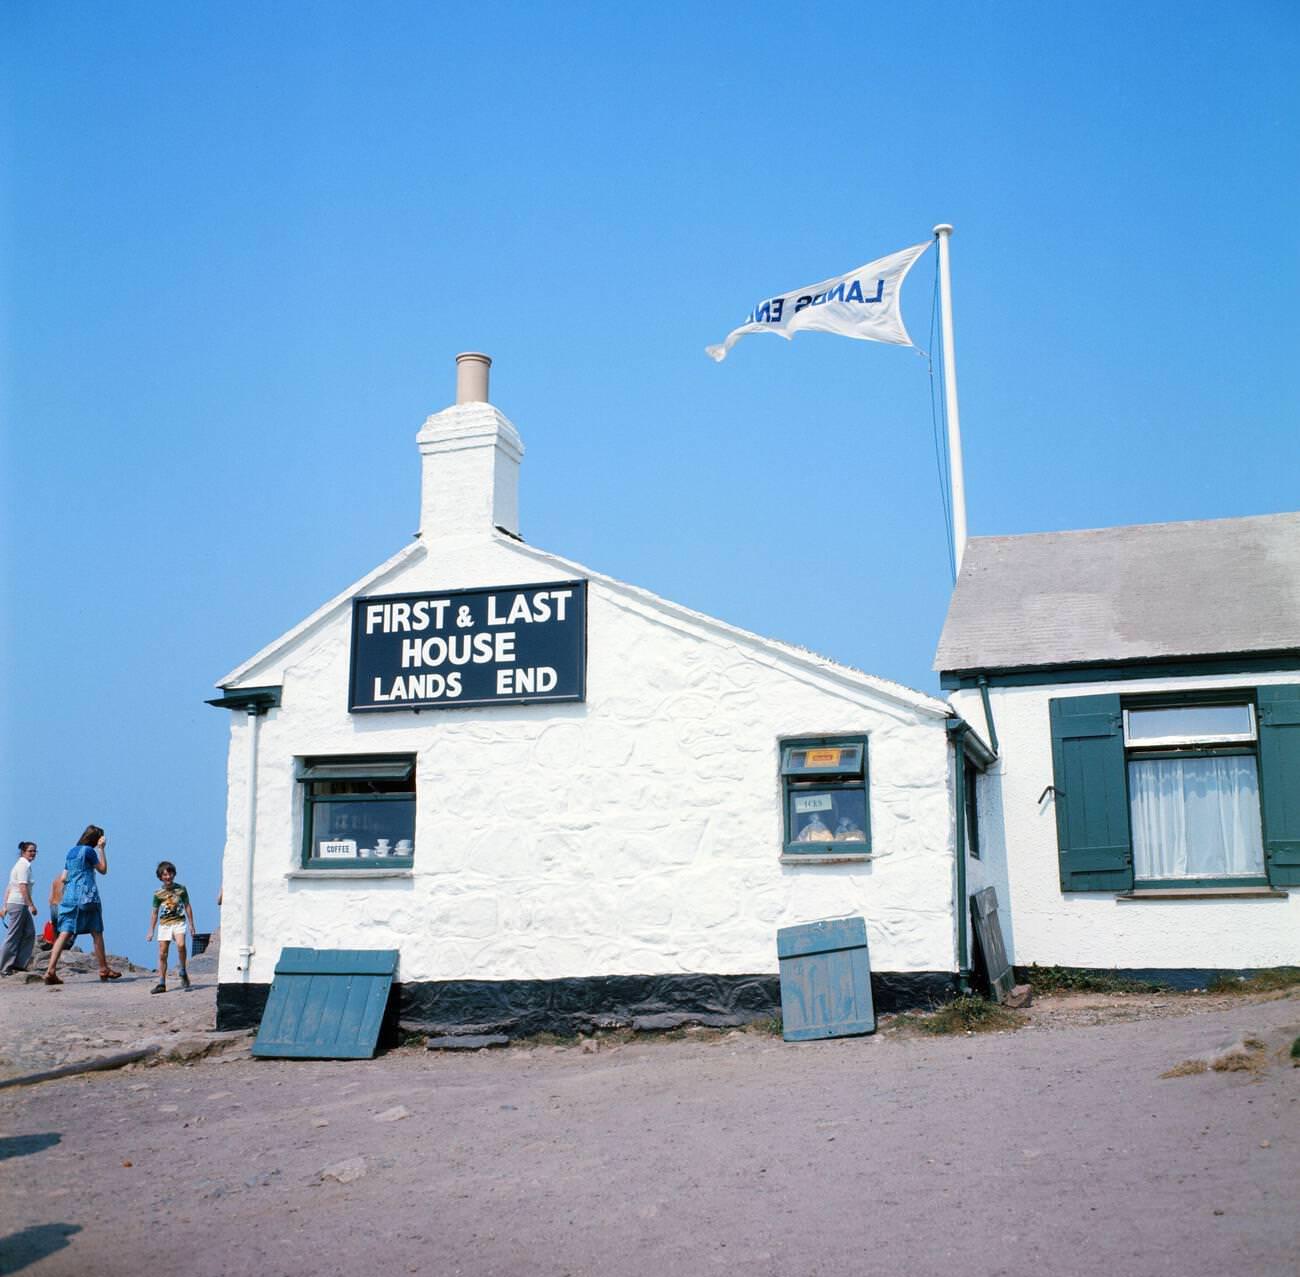 'First & Last House' at Lands End, Cornwall, August 1973.